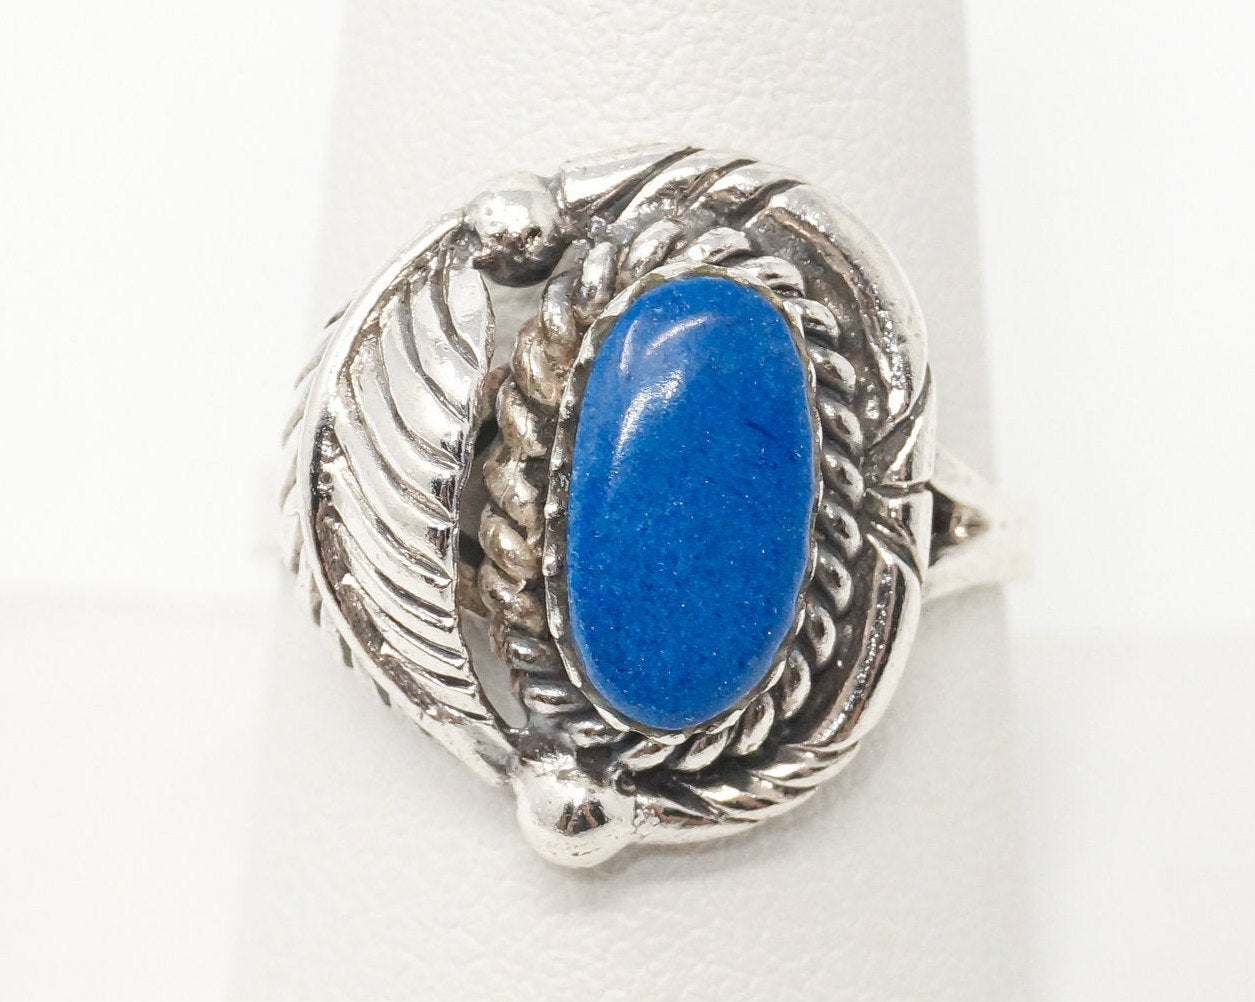 Vintage Native American Unsigned Lapis Lazuli Sterling Silver Ring - Sz 8.75